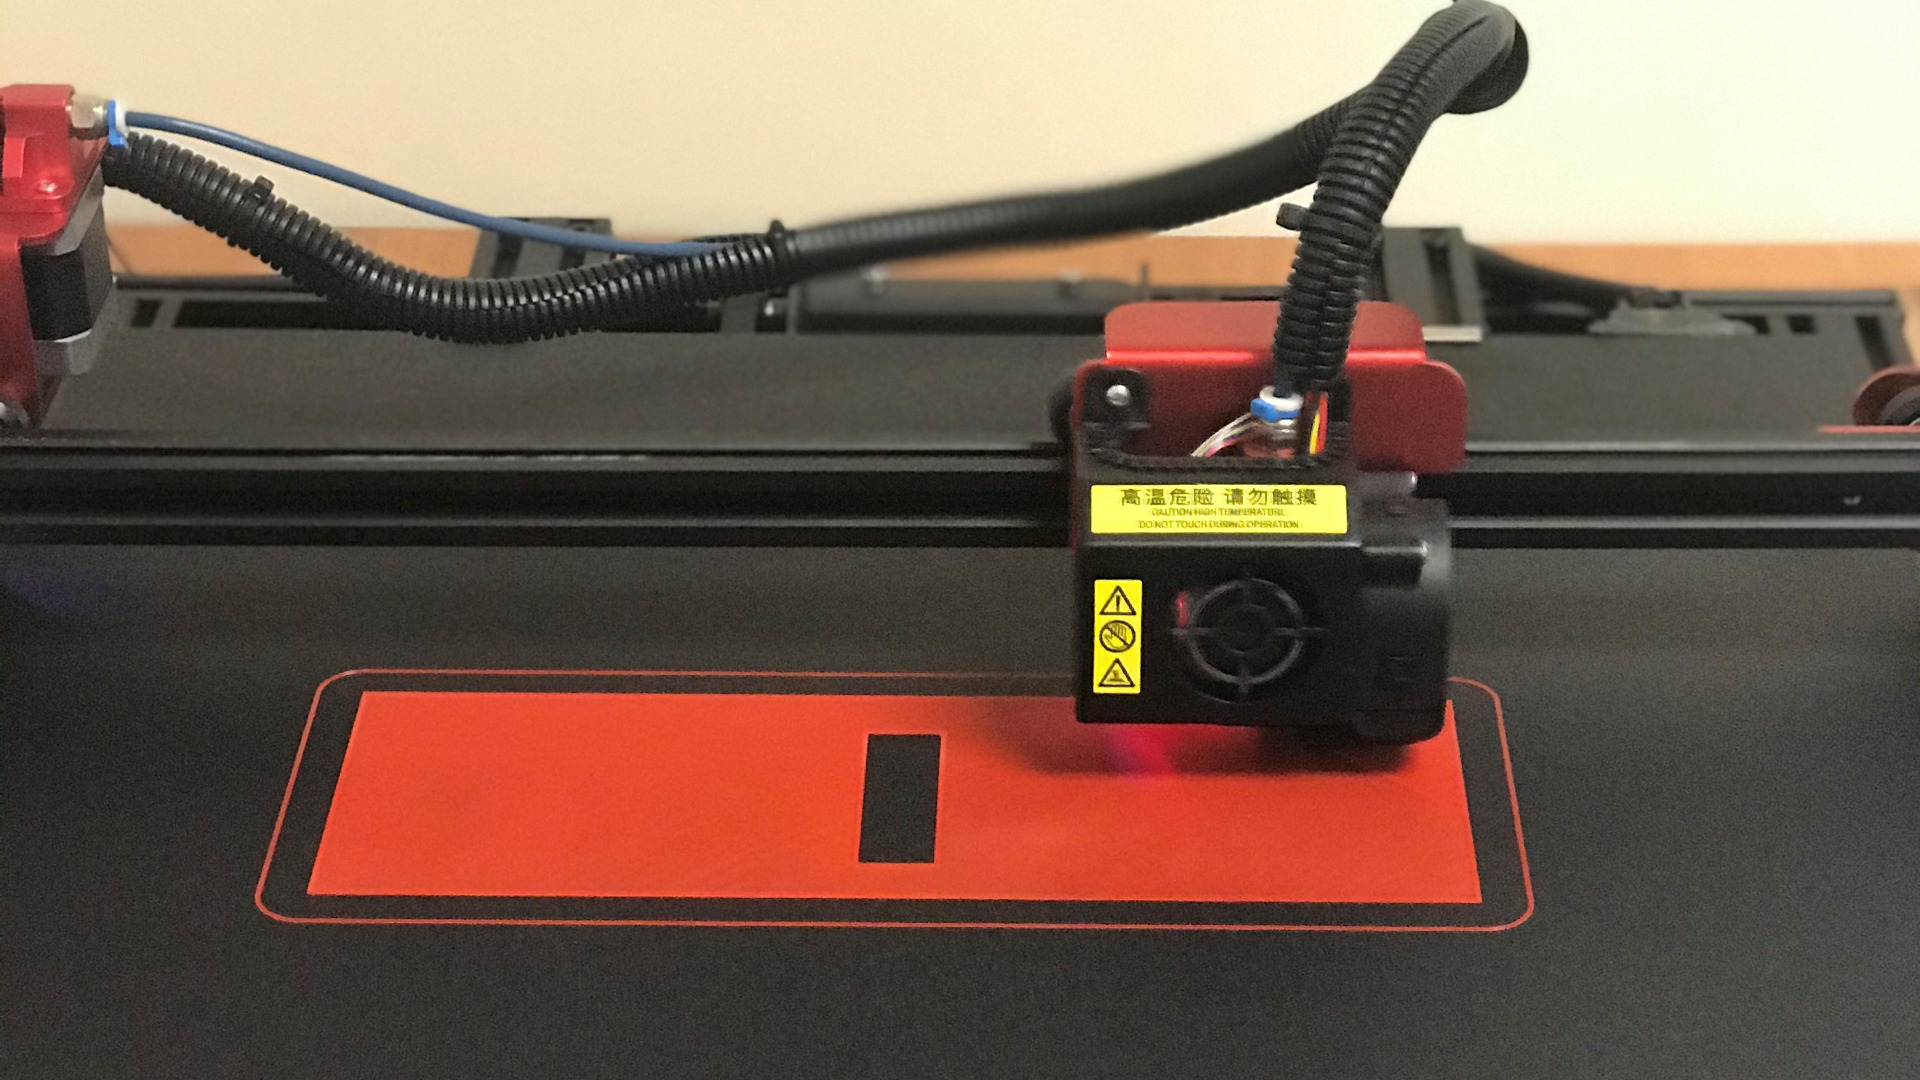 3D printed custom jig for quality control manufacturing straps